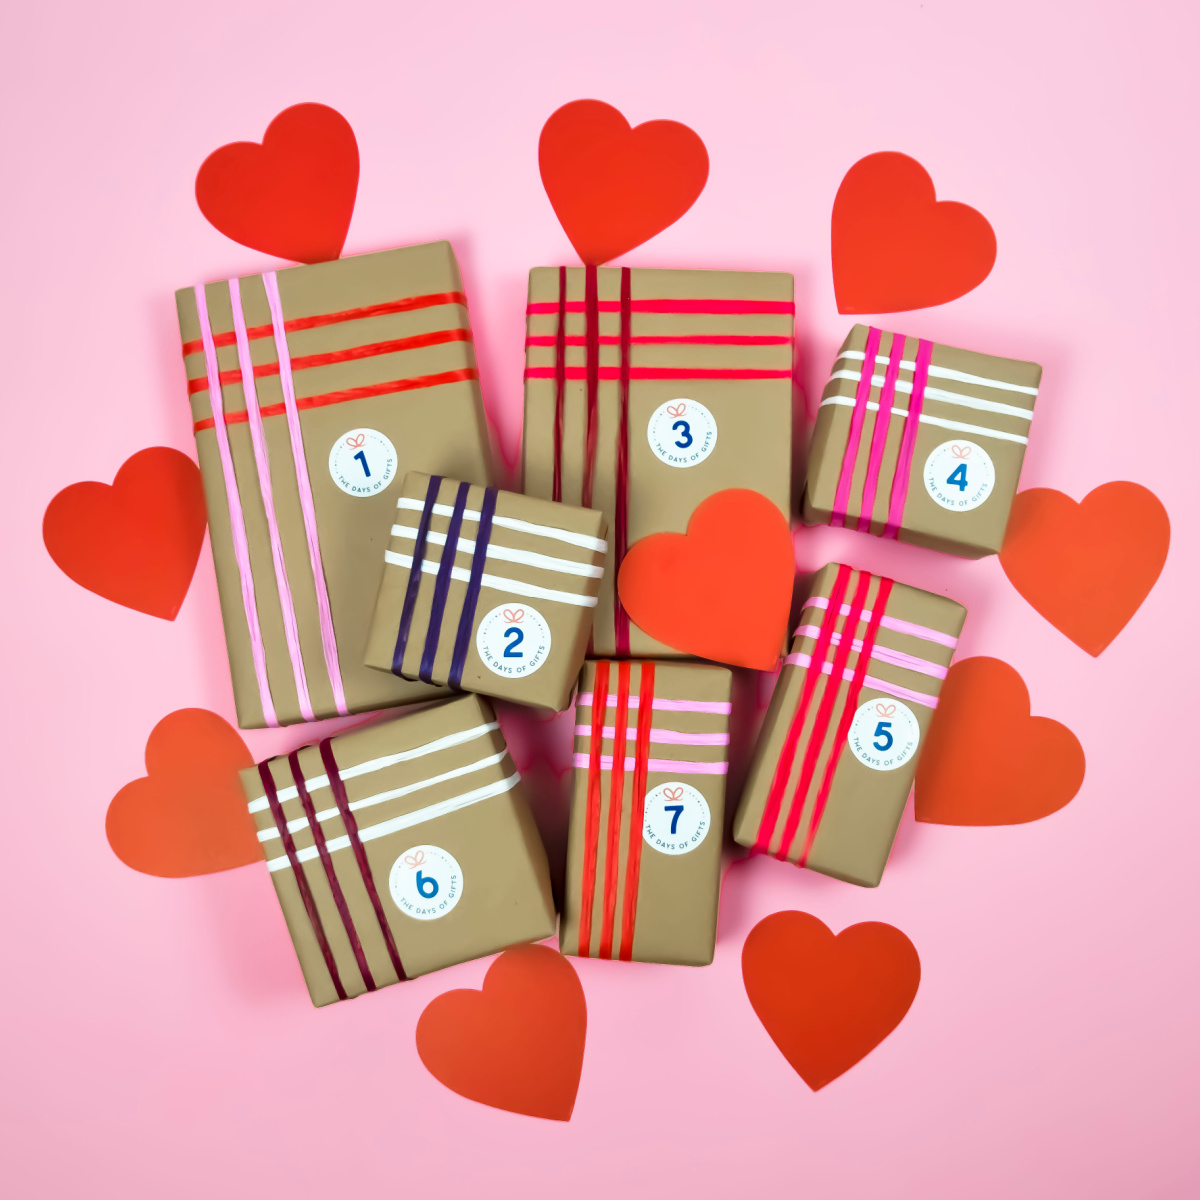 The 7 Days of Valentine's Day Gifts for Him